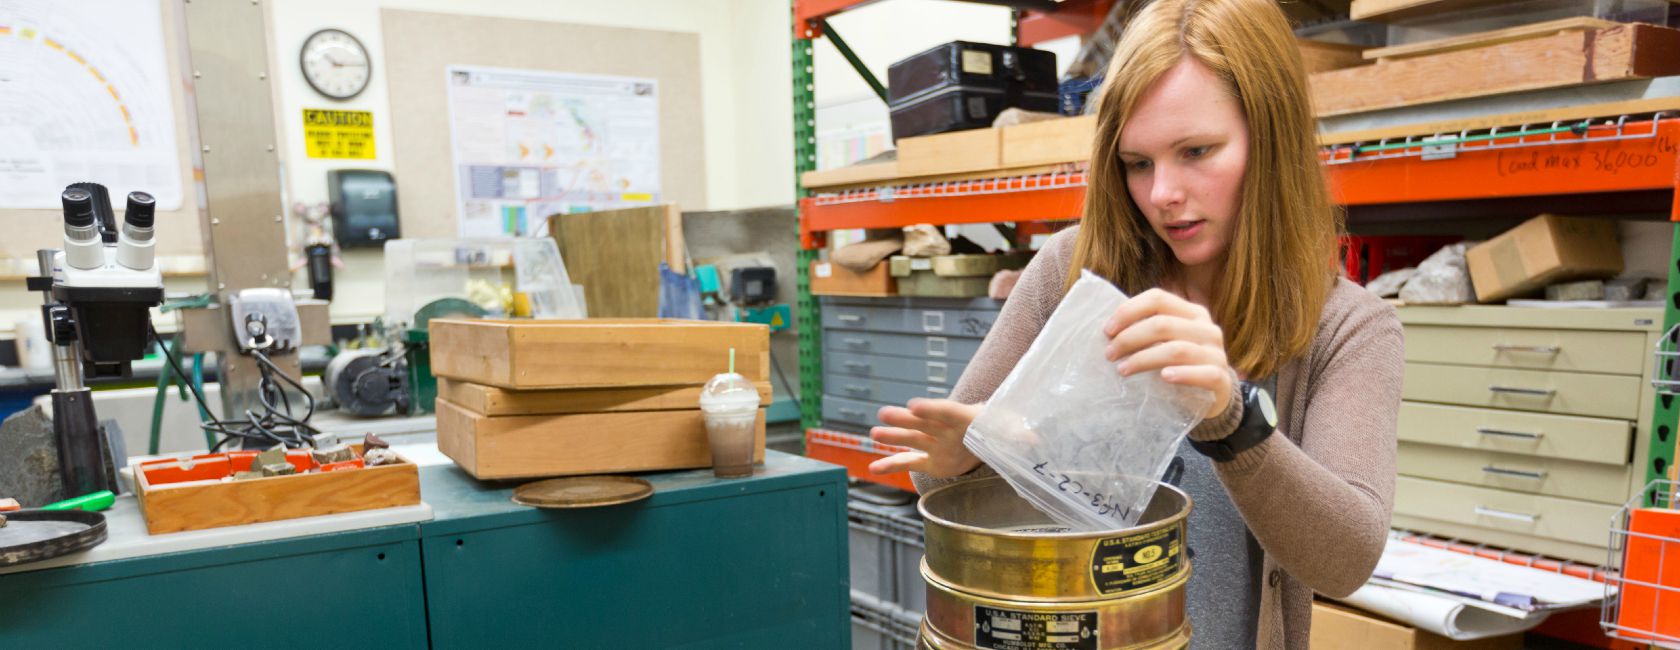 Samantha Harrison ’16 works in PLU’s Geoscience lab with samples collected from Mount Rainier. (Photo: John Froschauer: PLU)